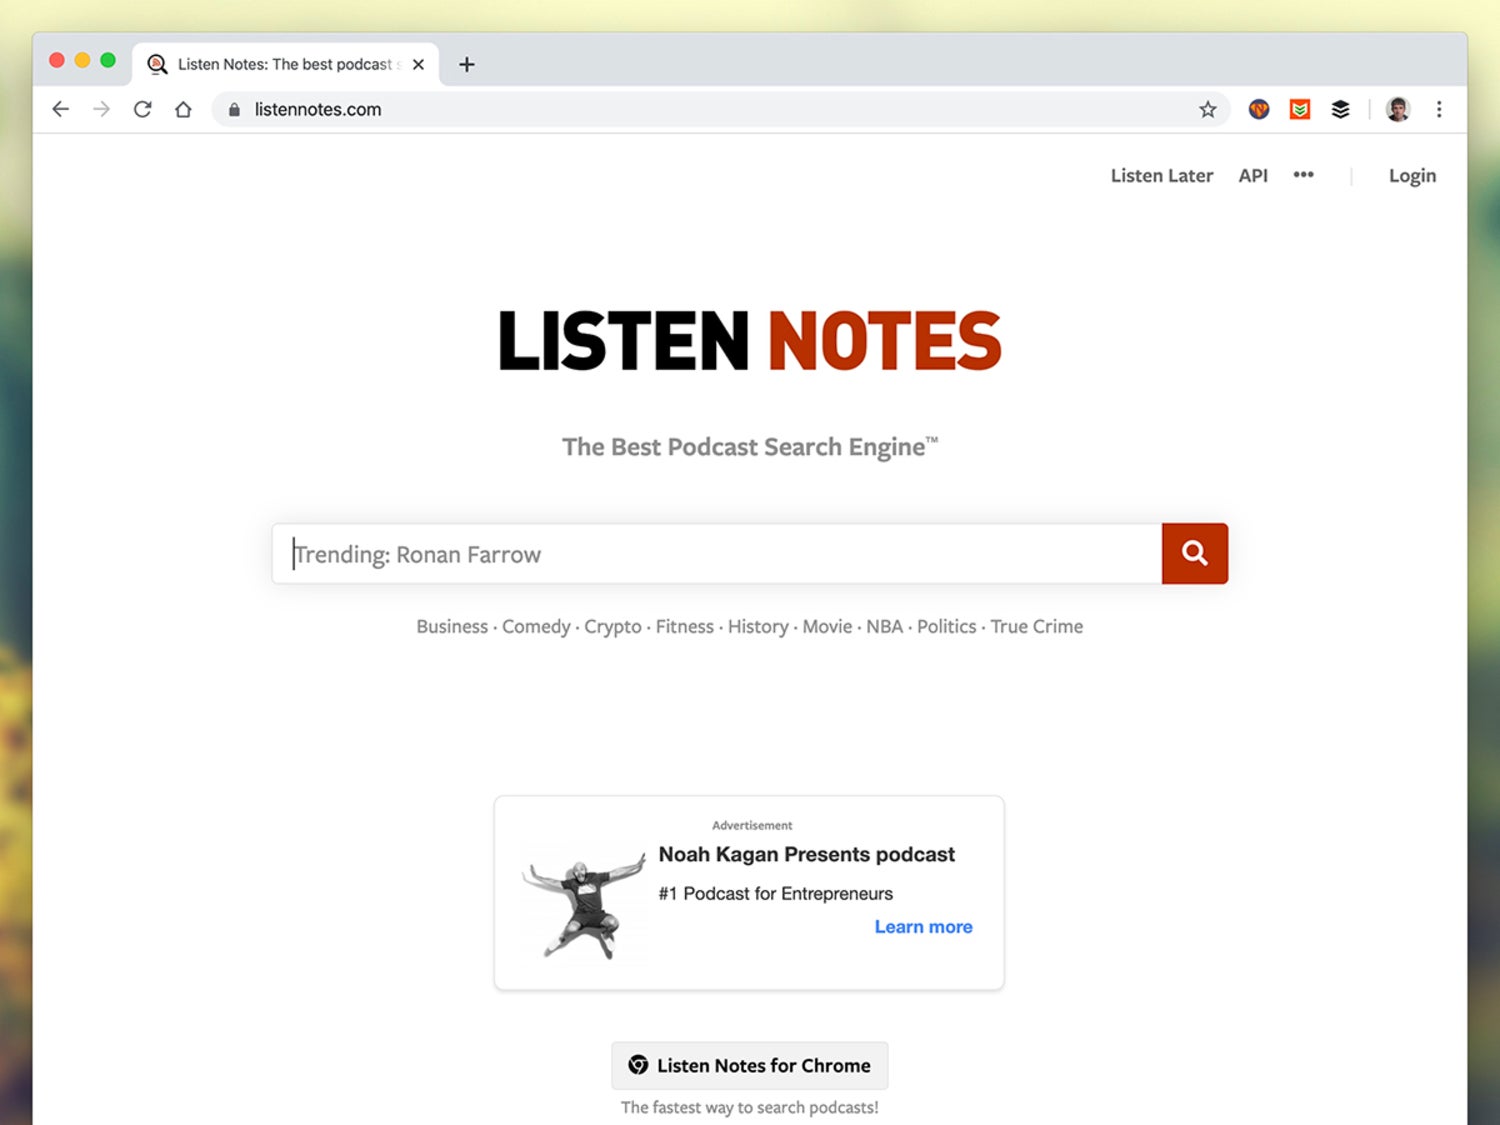 The Listen Notes interface on a macOS computer.